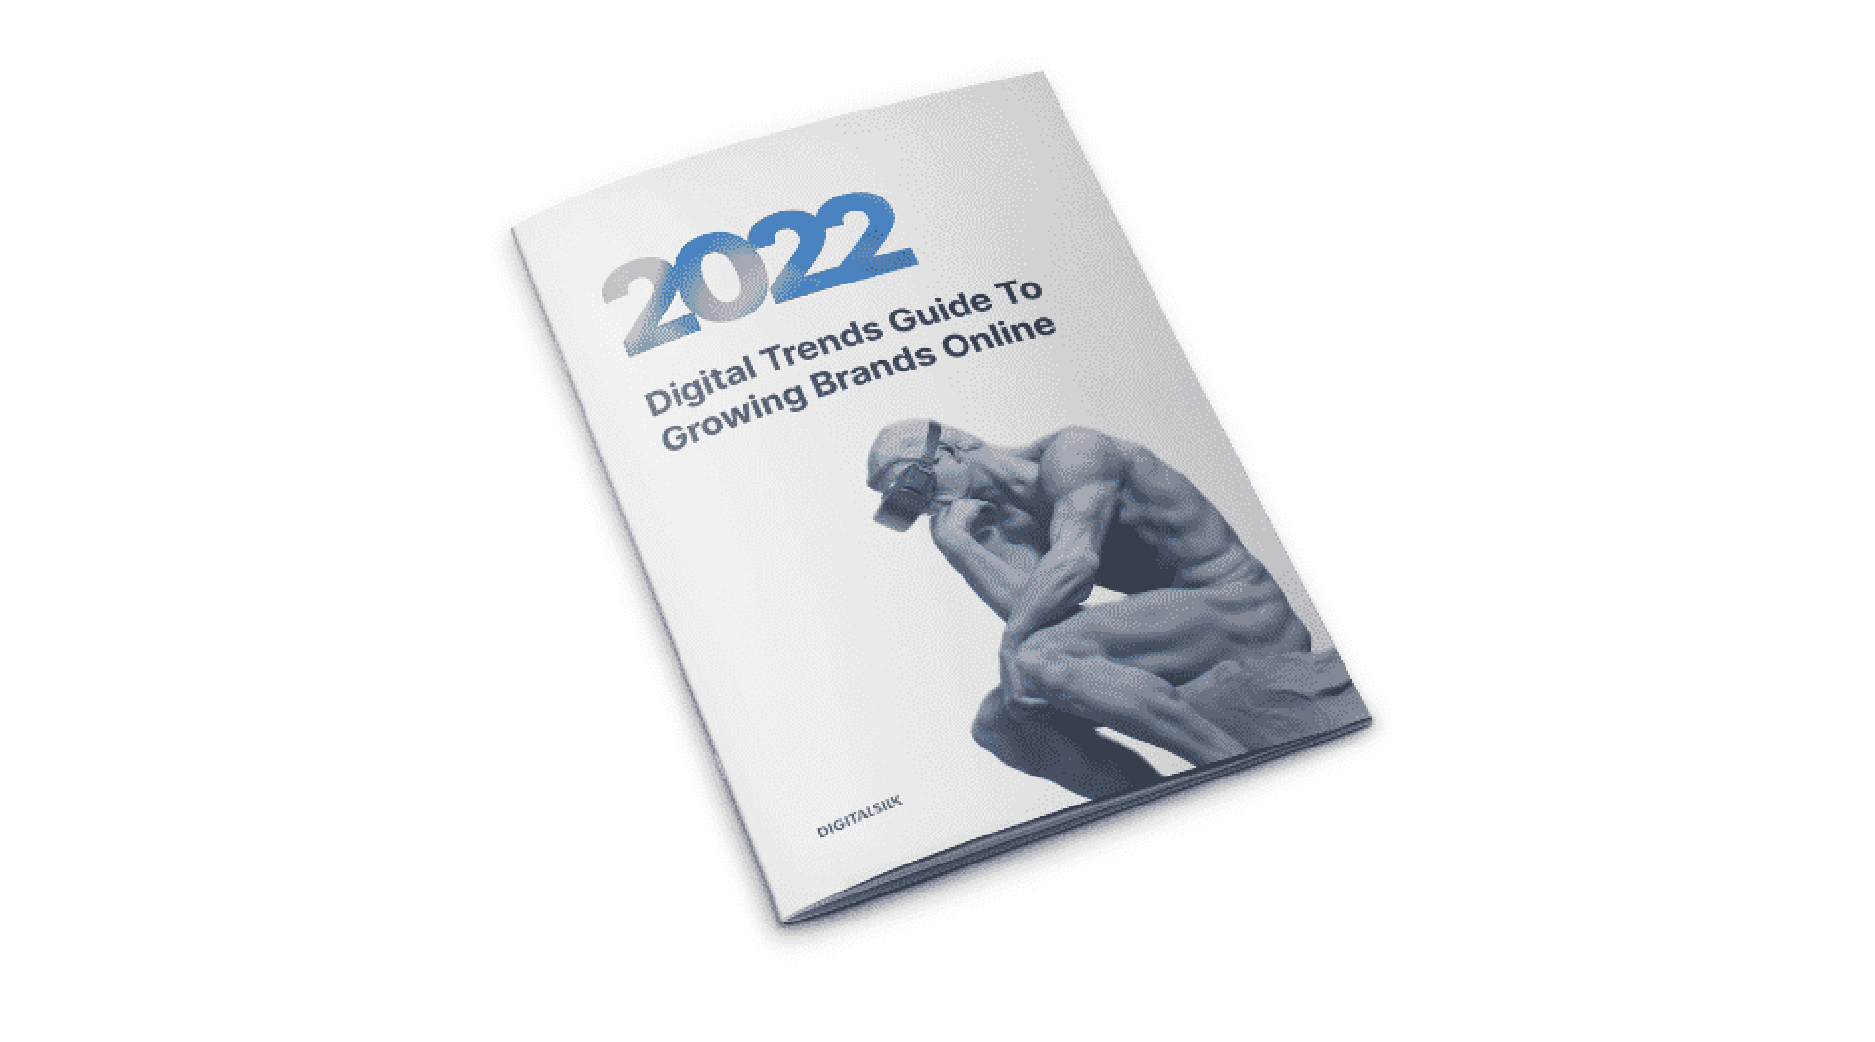 2022 digital trends guide to growing brands online - article cover-01